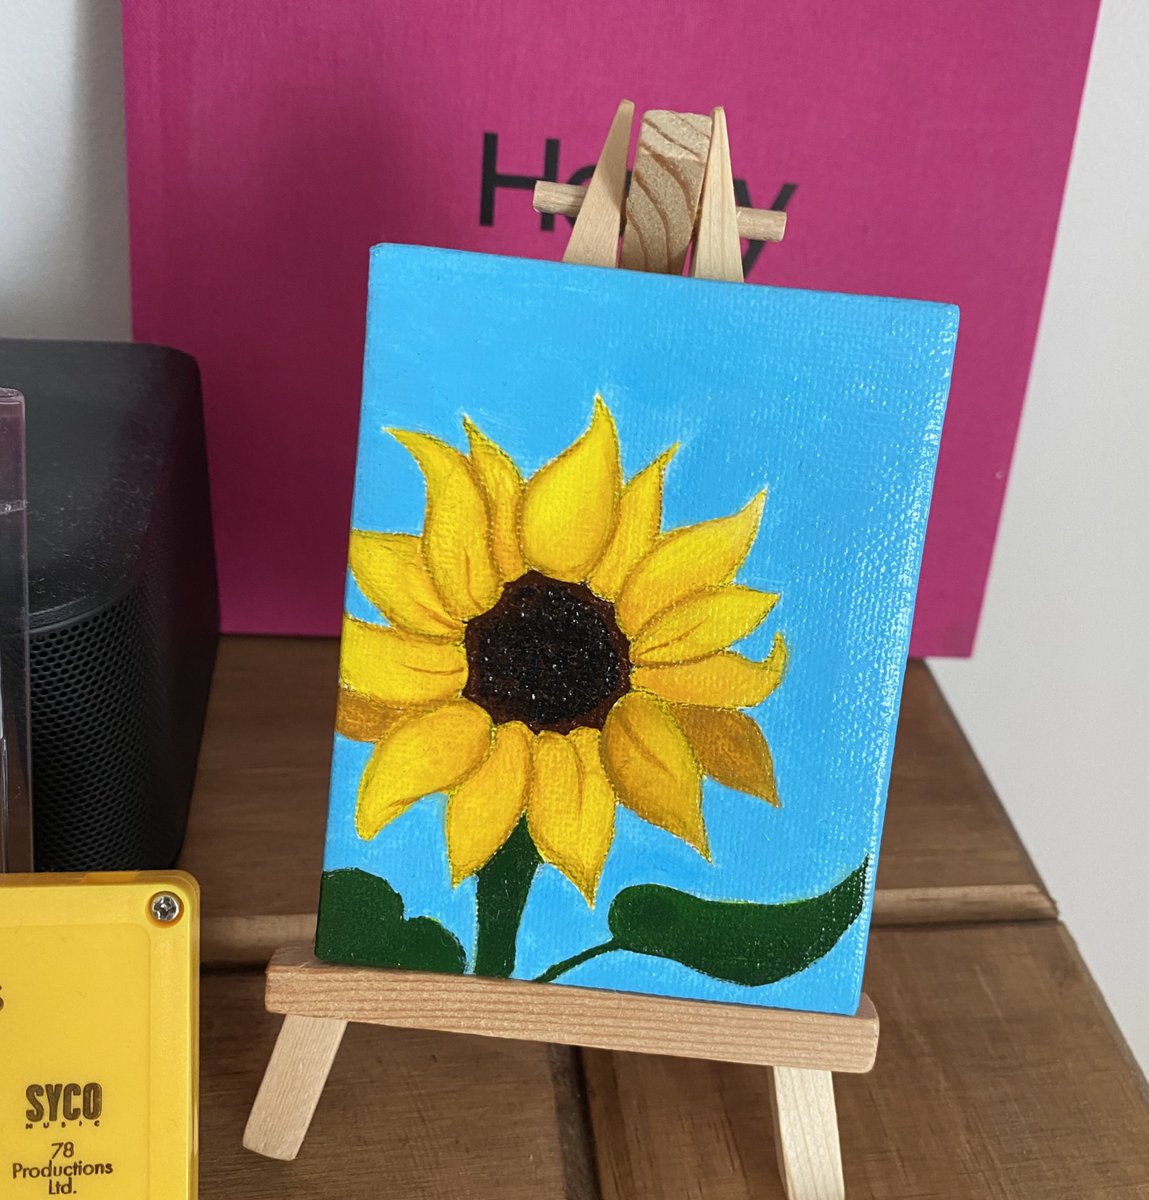 my shelf was hand made by my dad to display my favourite magazines, I added the tpwk stickers to the front and I added this print to the left later on, I have quite a few prints but this one on top of my drawers is my favourite and I also love this hand painted sunflower canvas